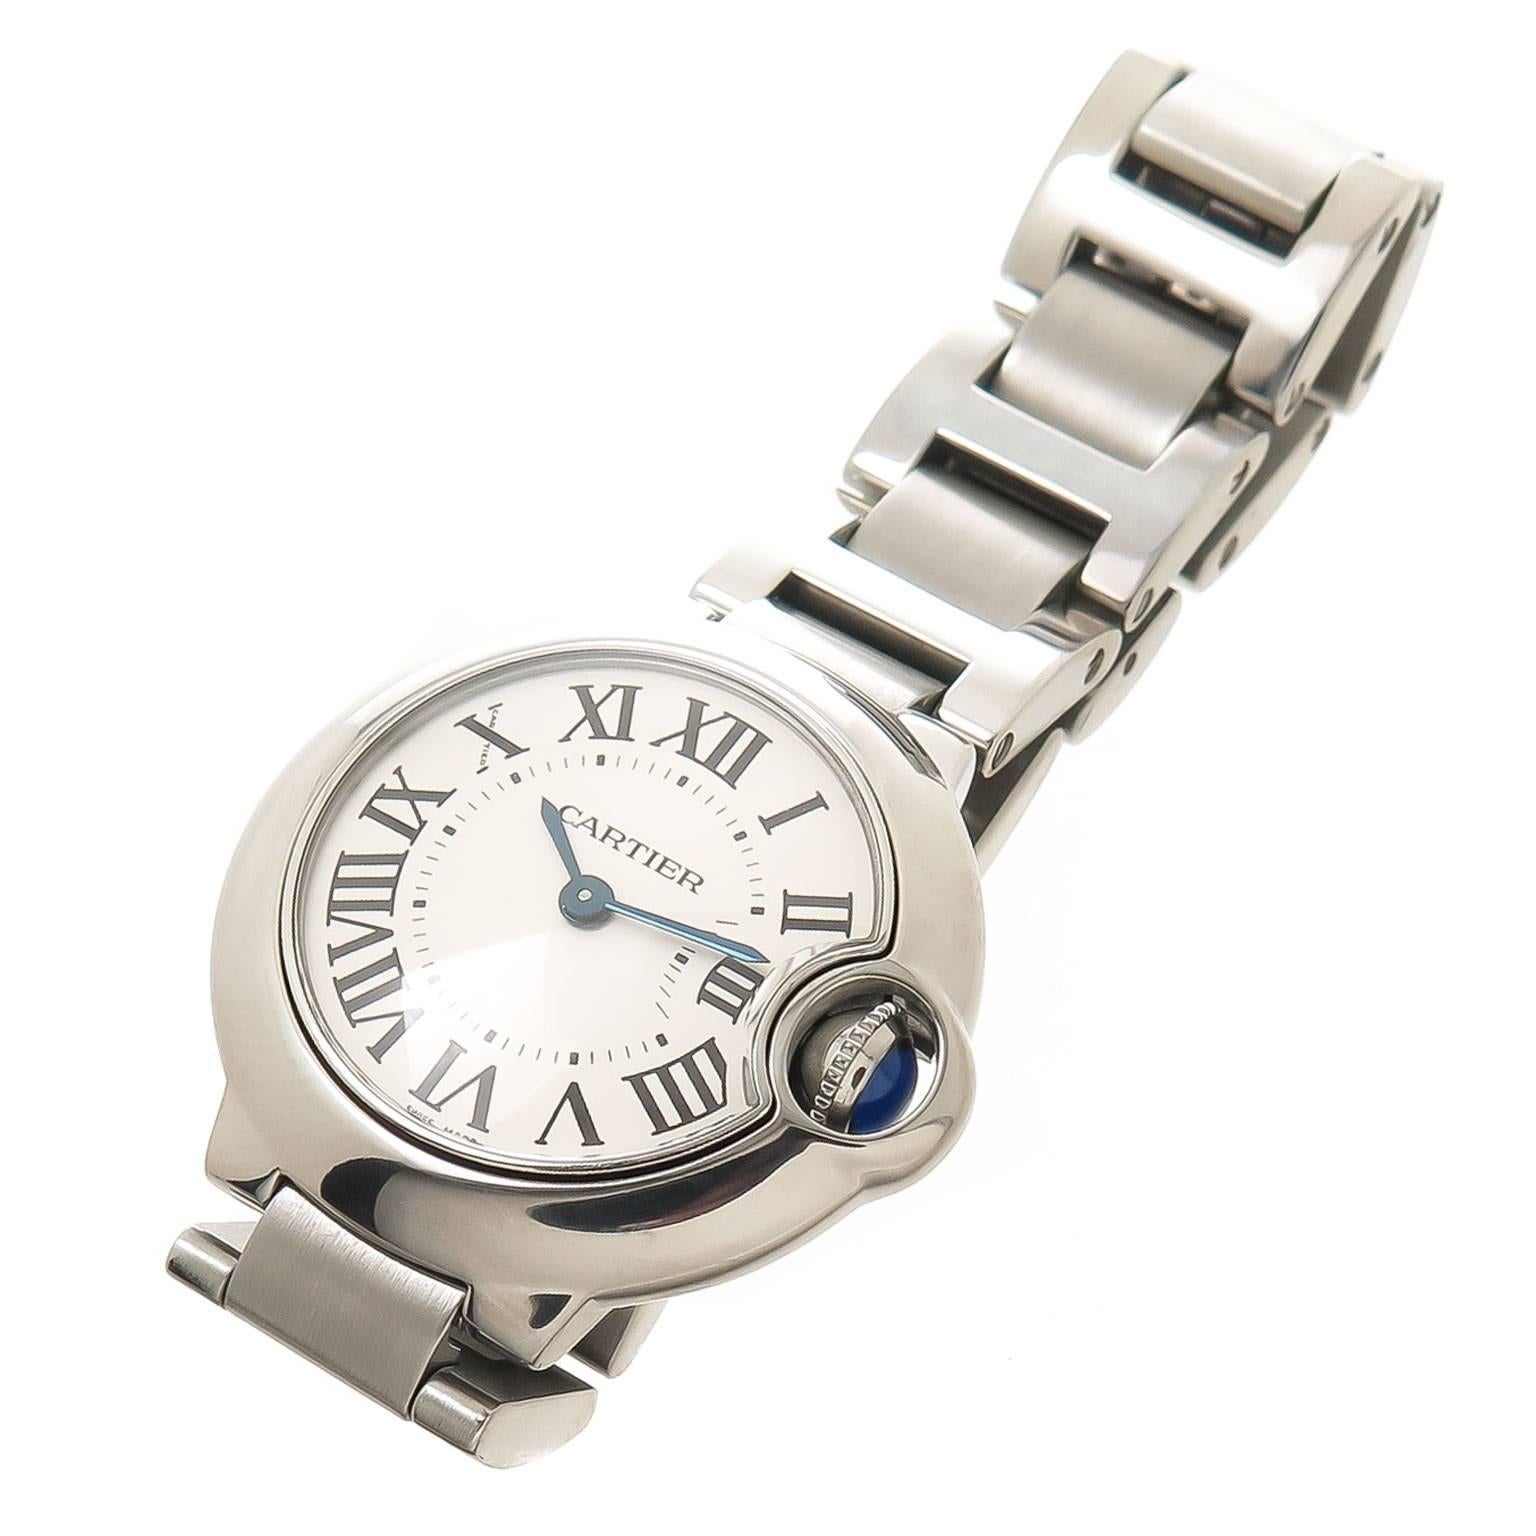 Circa 2014 Cartier Ballon Blue Ladies Wrist watch, 28 MM Stainless steel case, Quartz Movement, Silvered Dial with Black Roman Numerals, scratch resistant crystal and a Sapphire crown. 1/2 inch wide Steel Bracelet with Deployment clasp. Total watch